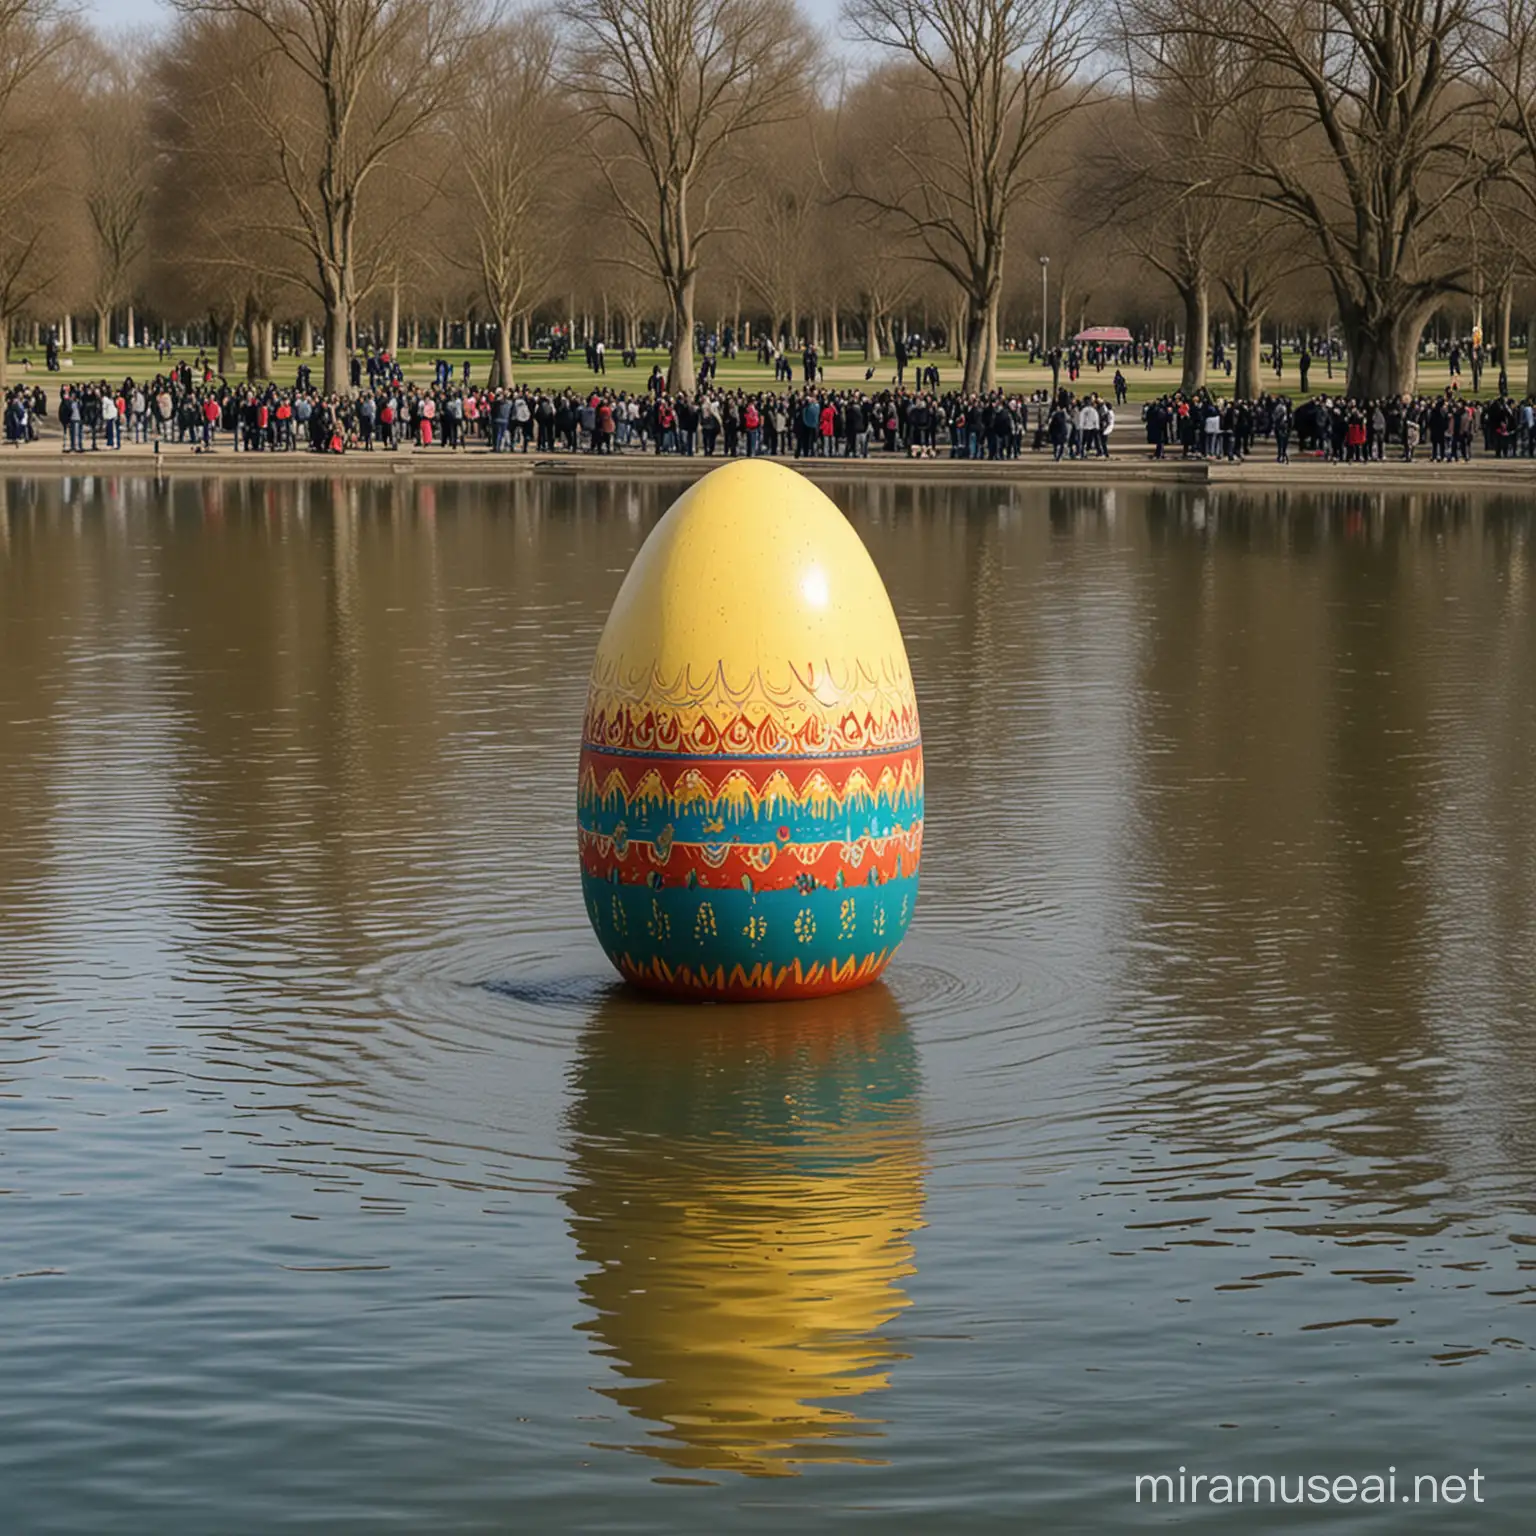 Giant Easter Egg Floating in Lake Daumesnil Paris Vibrant Holiday Display